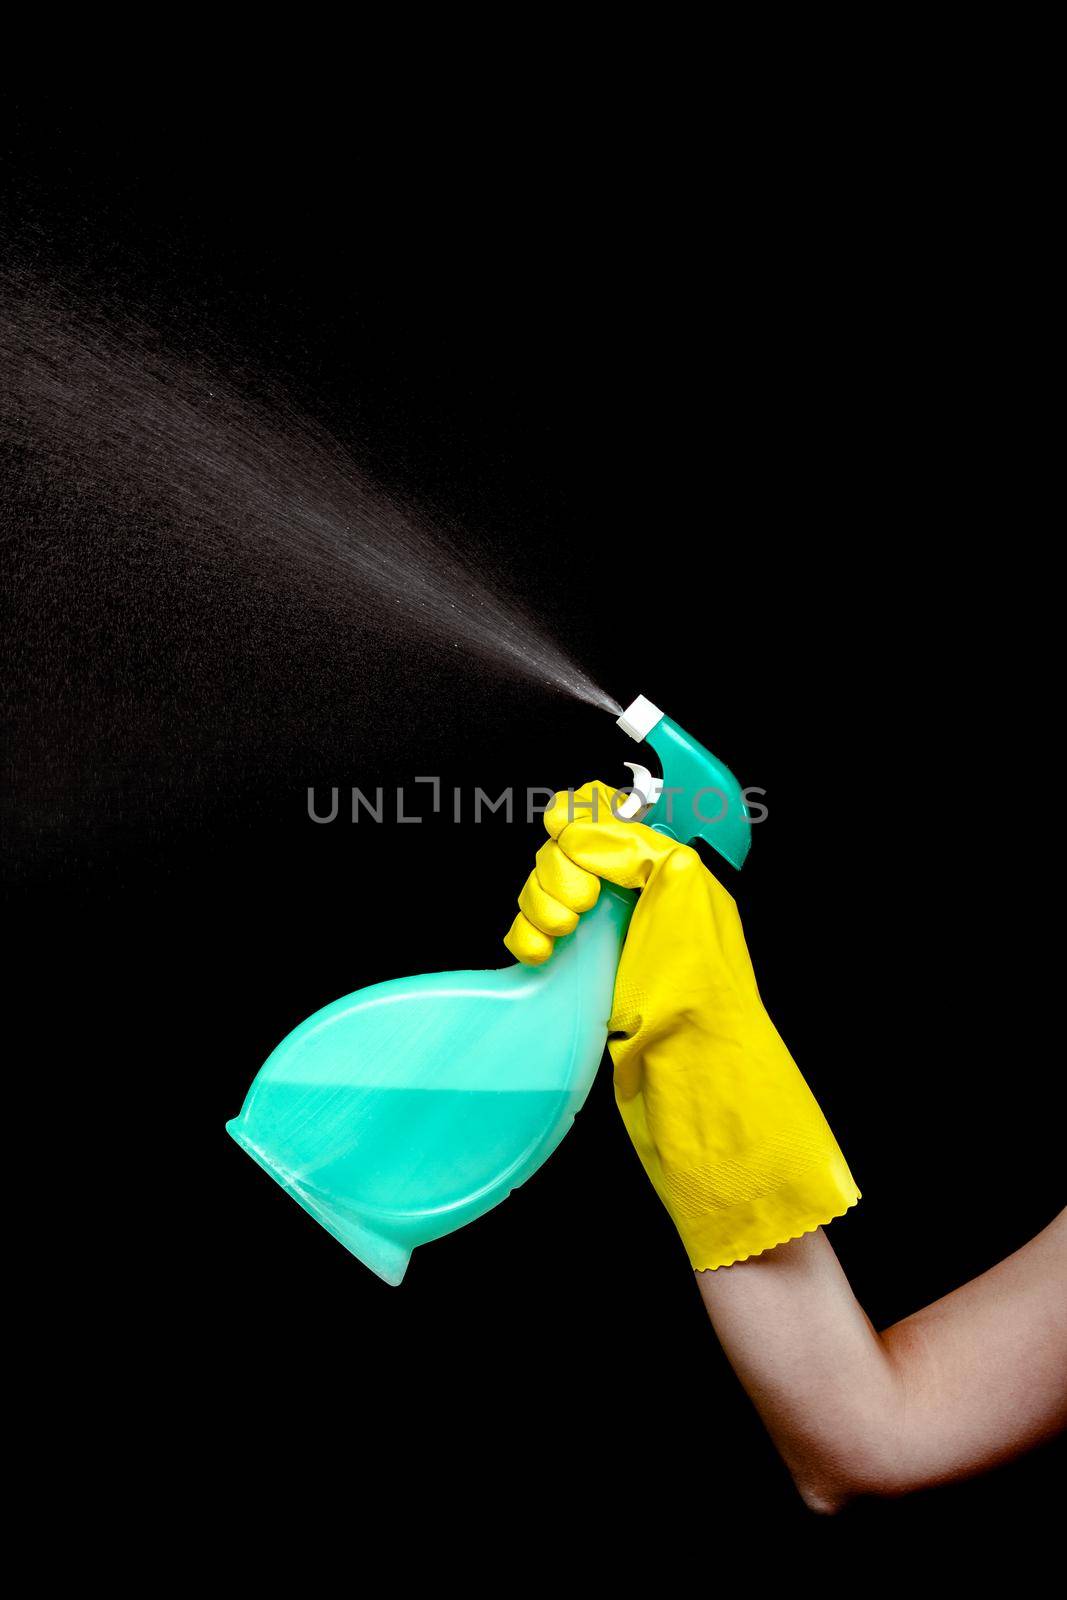 hand in yellow glove spraying liquid cleaning detergent in the air against black background by kokimk